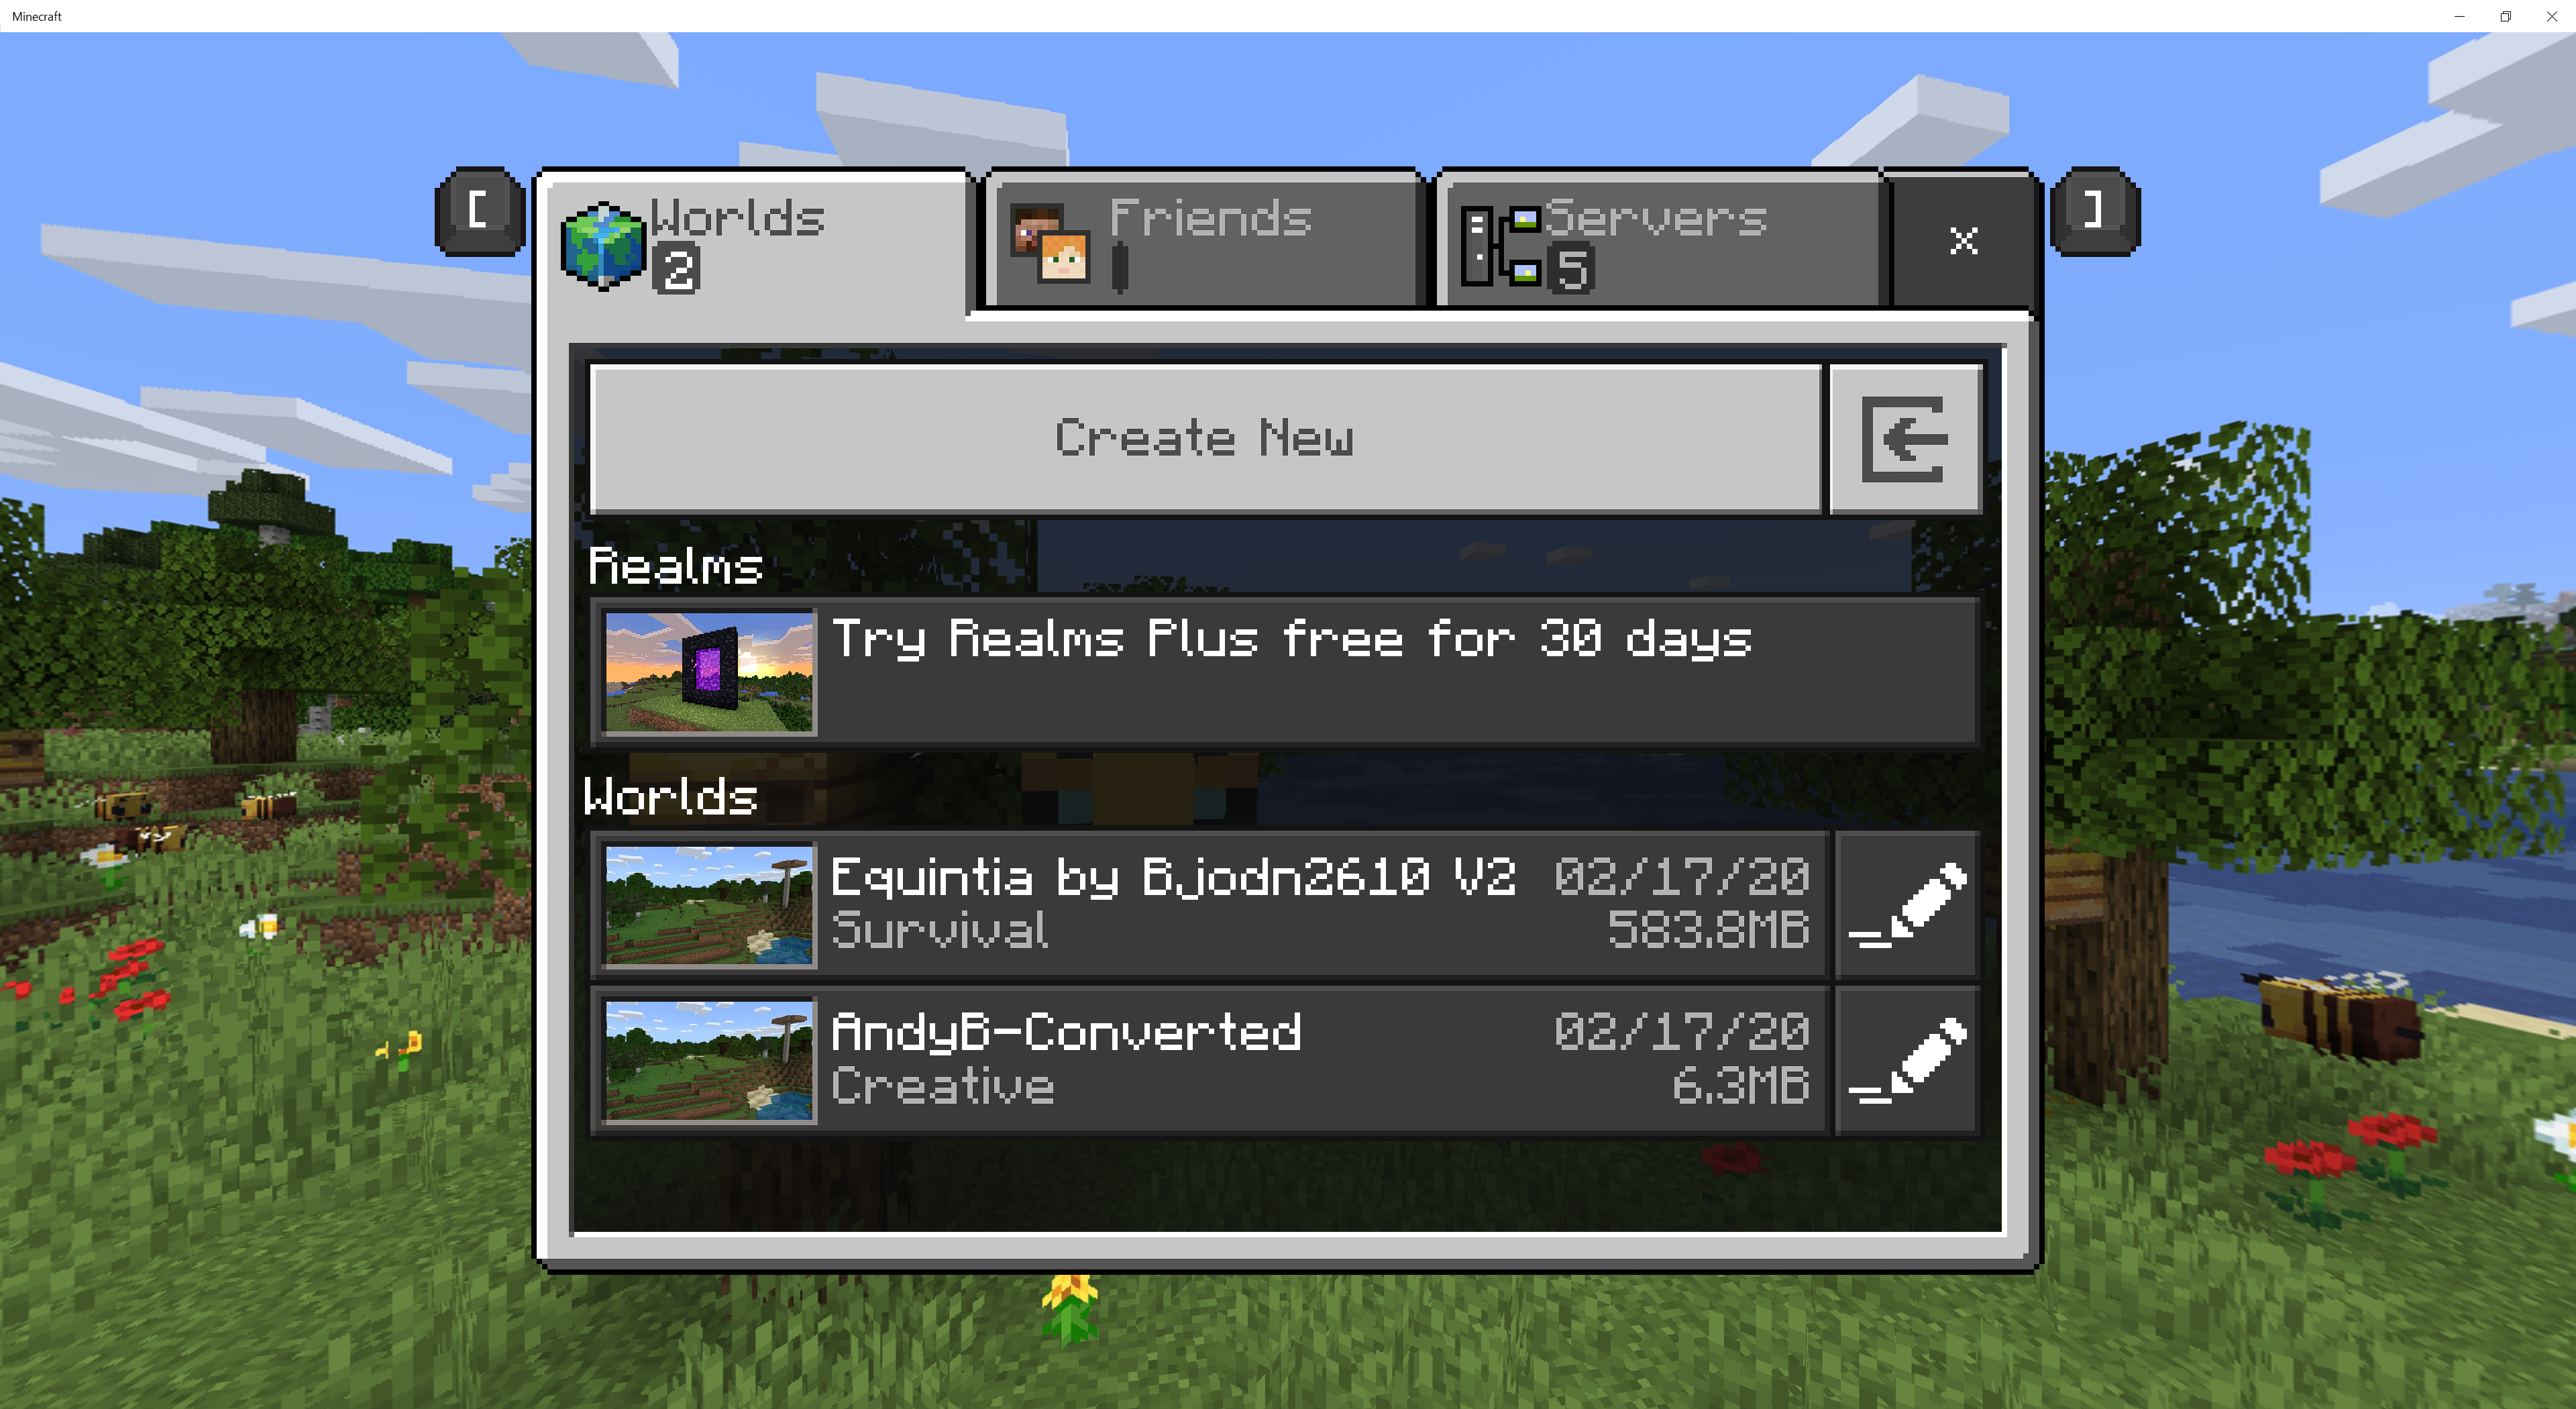 how do i make it so ican see icons on universal minecraft editor